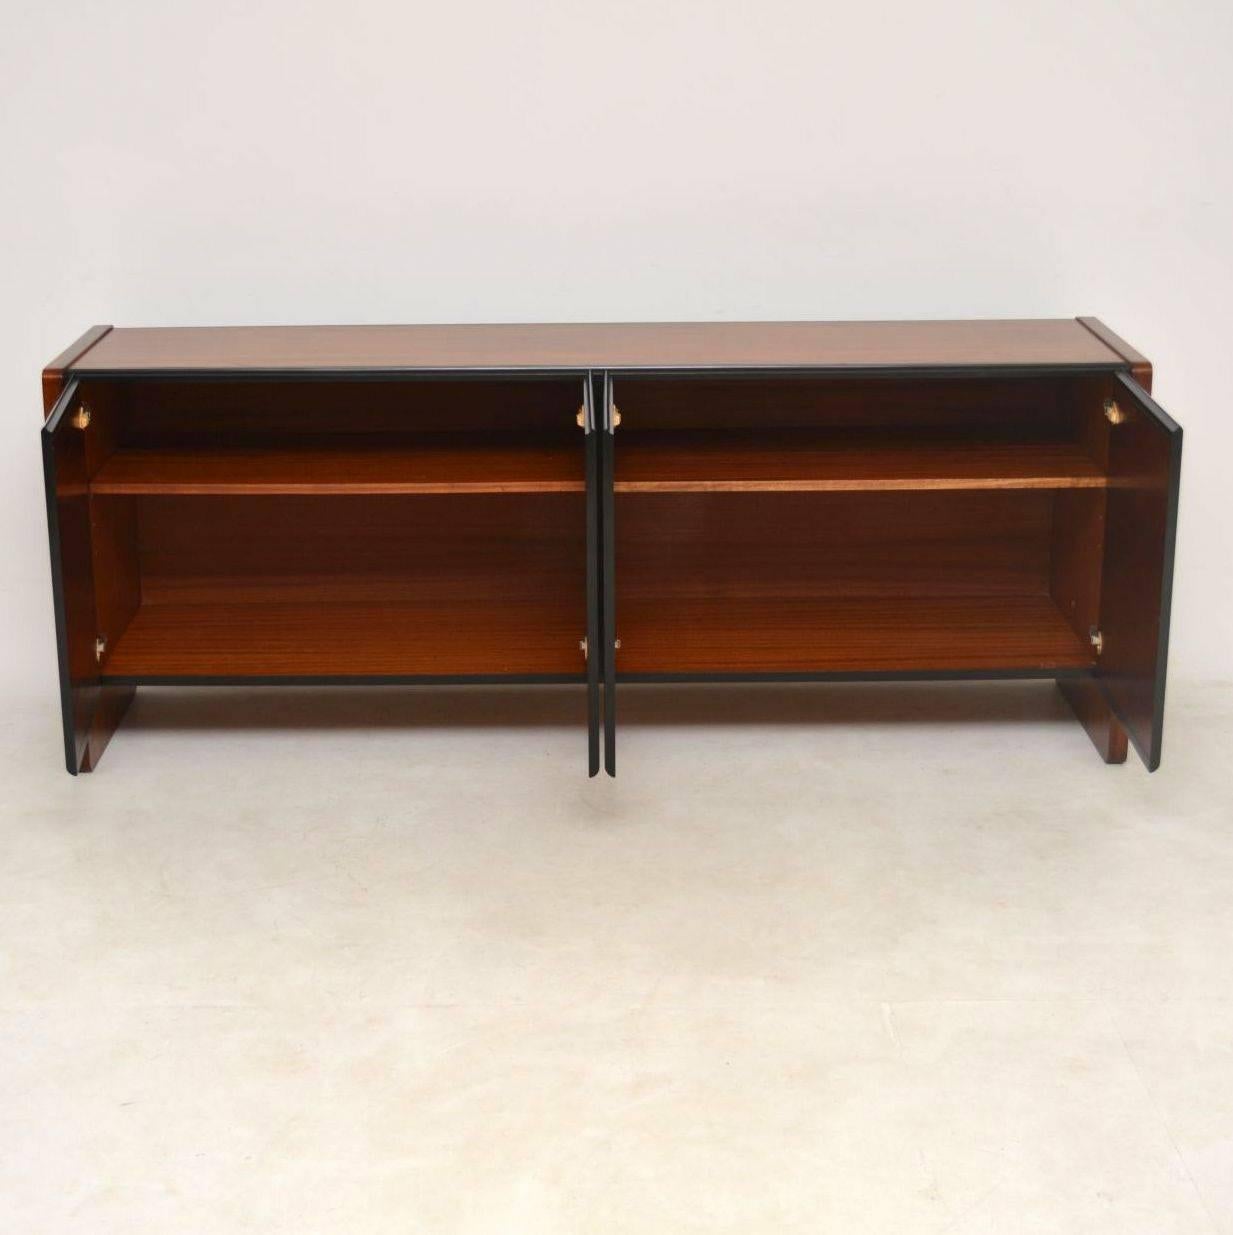 A beautiful and very well made Danish vintage sideboard, this dates from around the 1960s-1970s. We have had this stripped and re-polished to a very high standard, the condition is superb throughout. It has a lovely color and beautiful grain